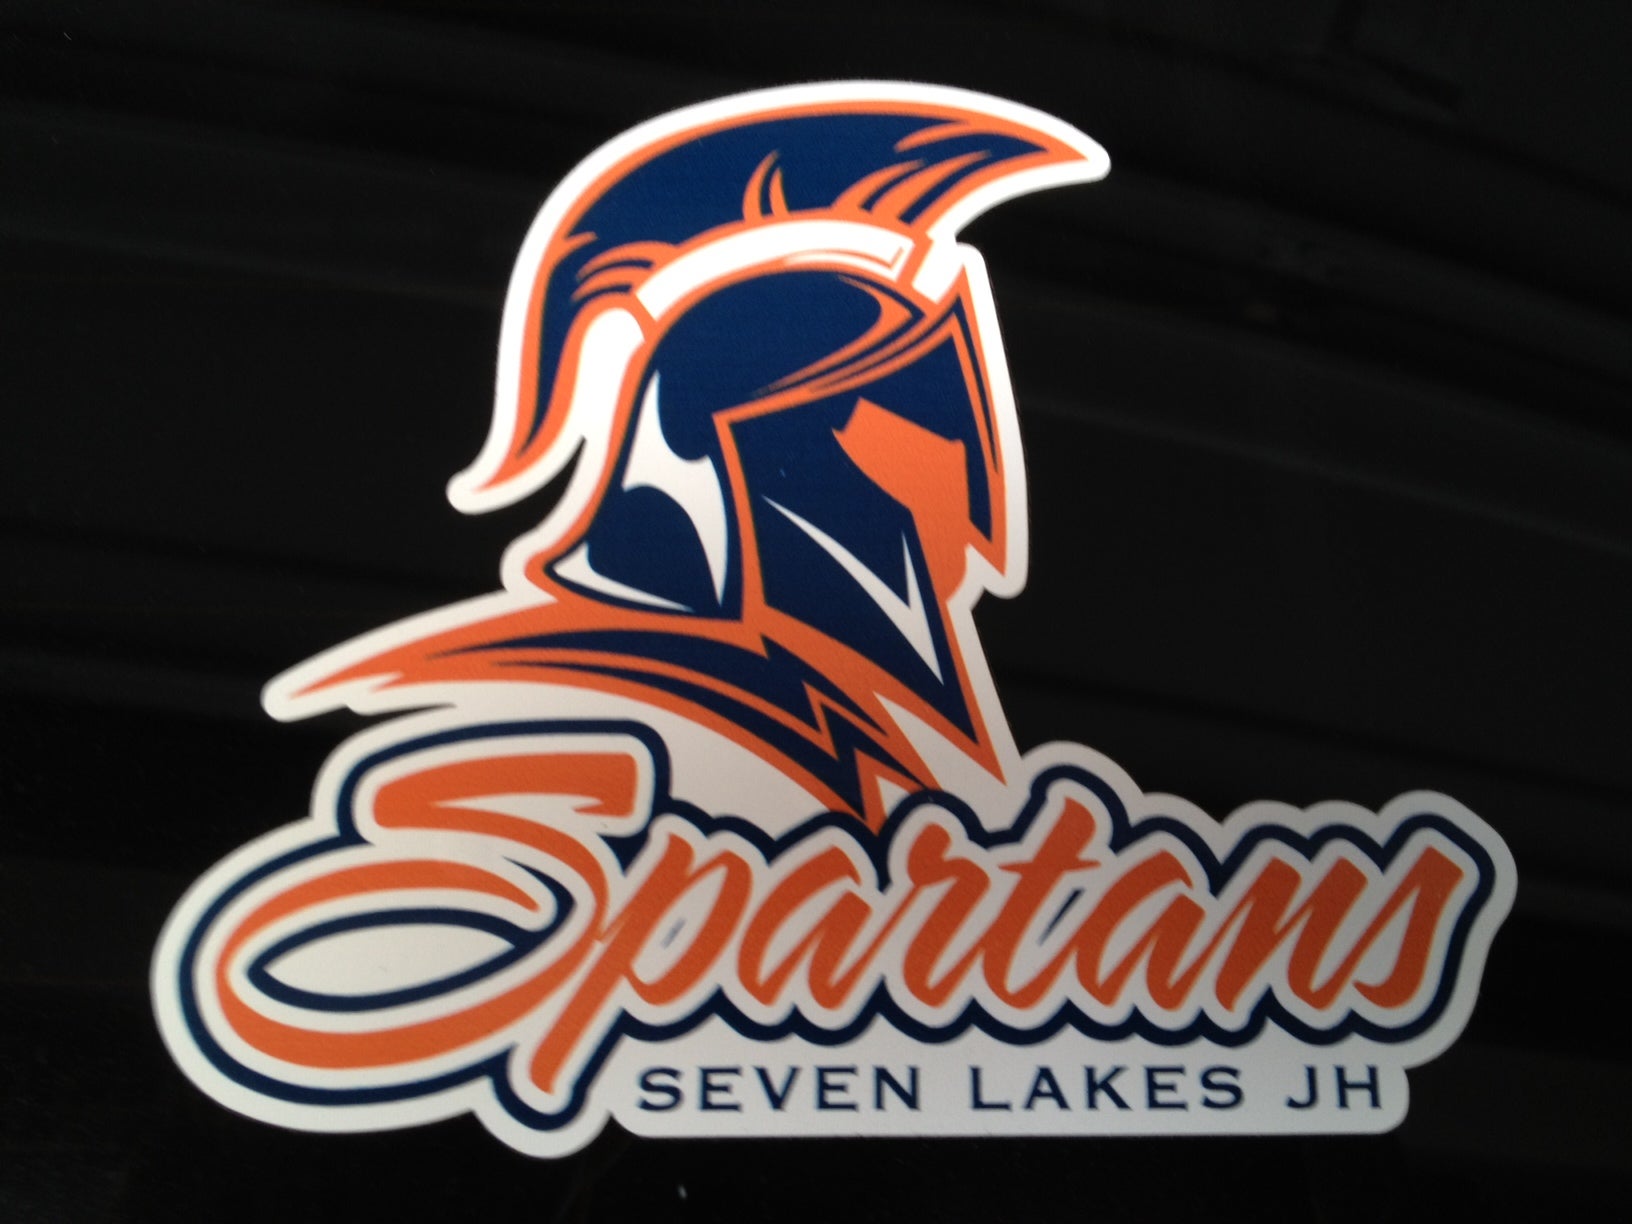 The SPARTANS!!! (of Seven Lakes Jr. High)